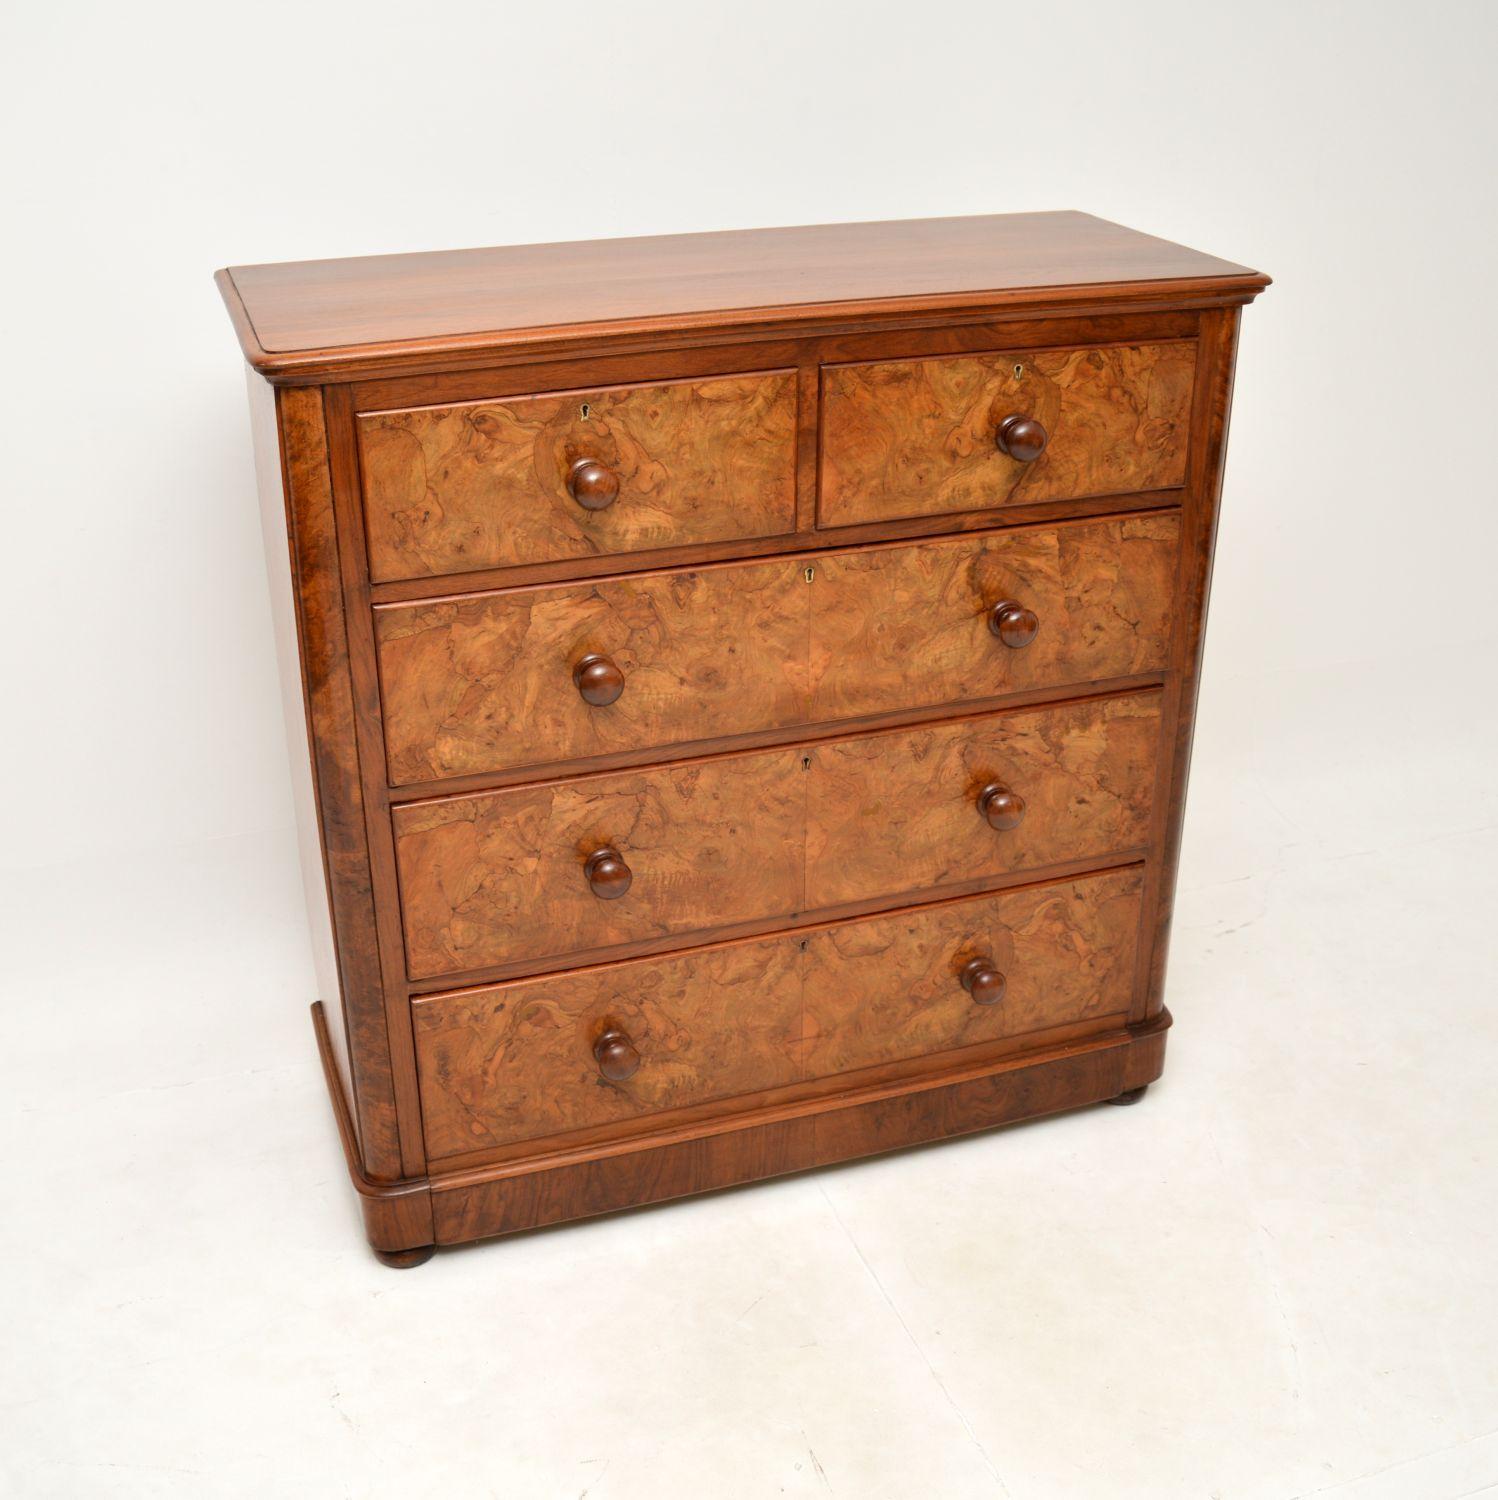 A magnificent & large antique Victorian burr walnut chest of drawers. This was made in England, it dates from the 1860-80’s.

The quality is outstanding, this is a large and very useful piece. There is lots of storage space within the generous